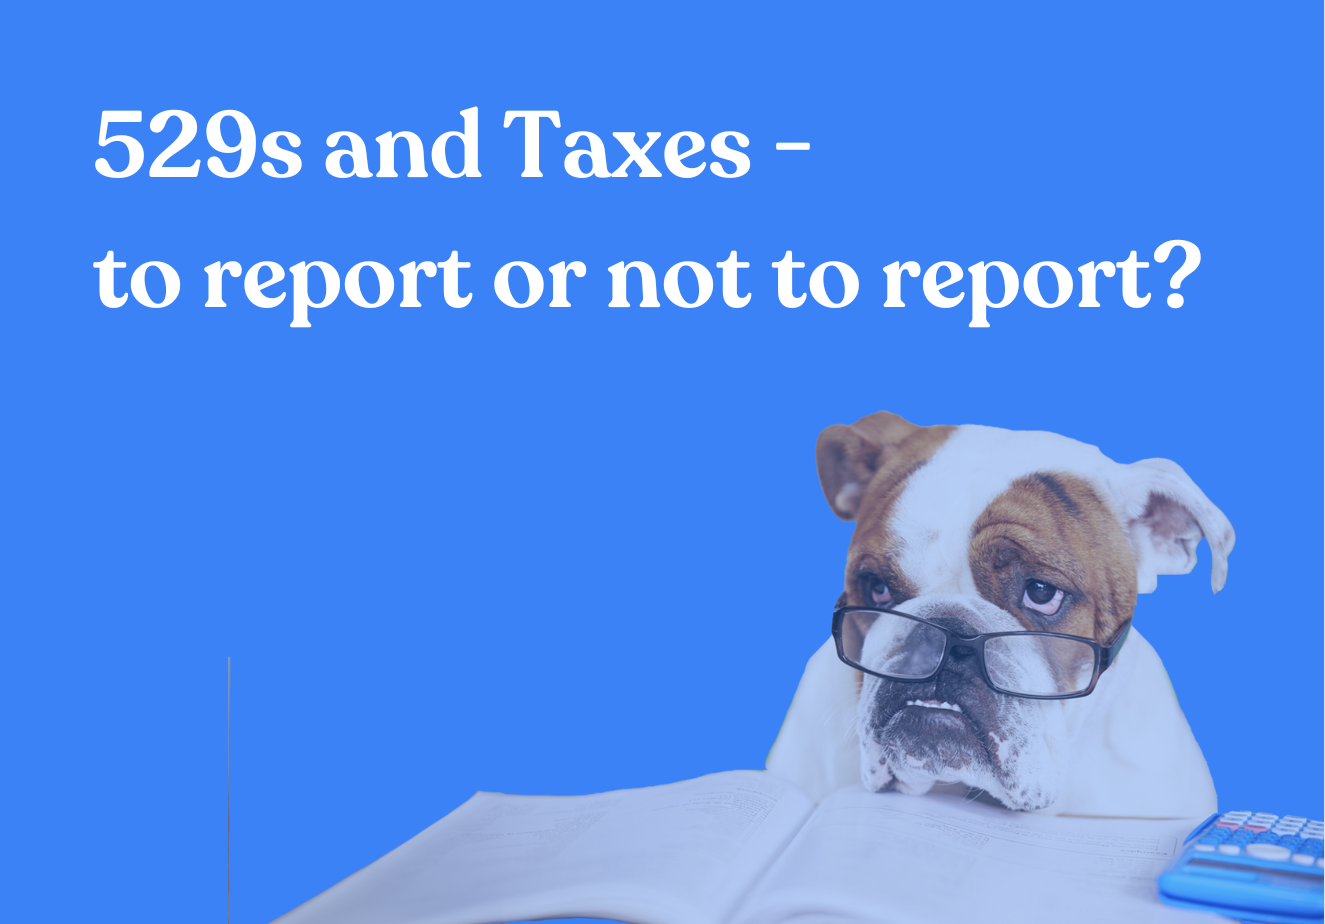 529s and Taxes - To Report or Not to Report?